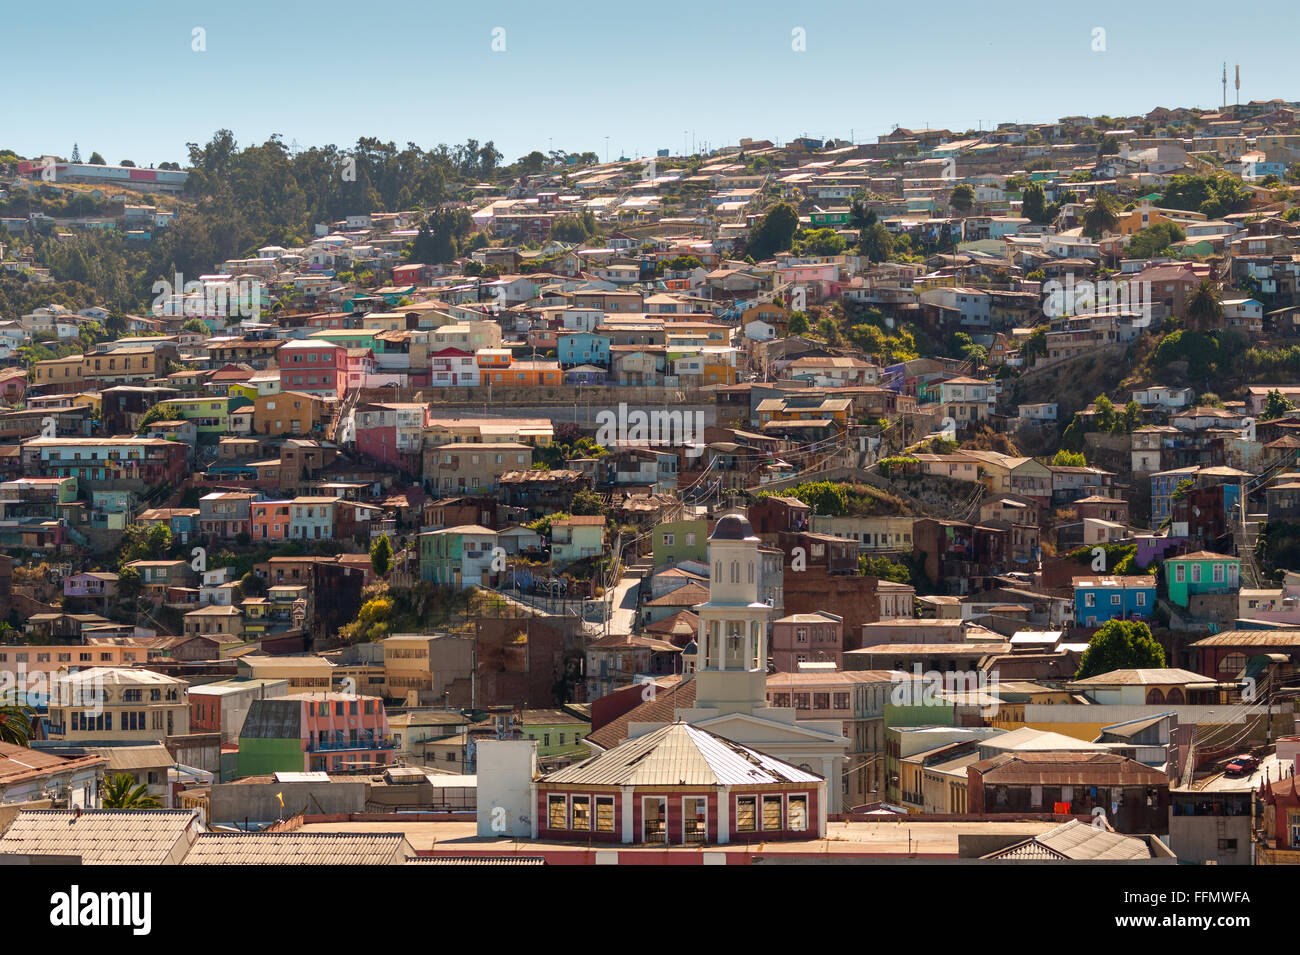 Colorful buildings on the hills of the UNESCO World Heritage city of Valparaiso, Chile Stock Photo